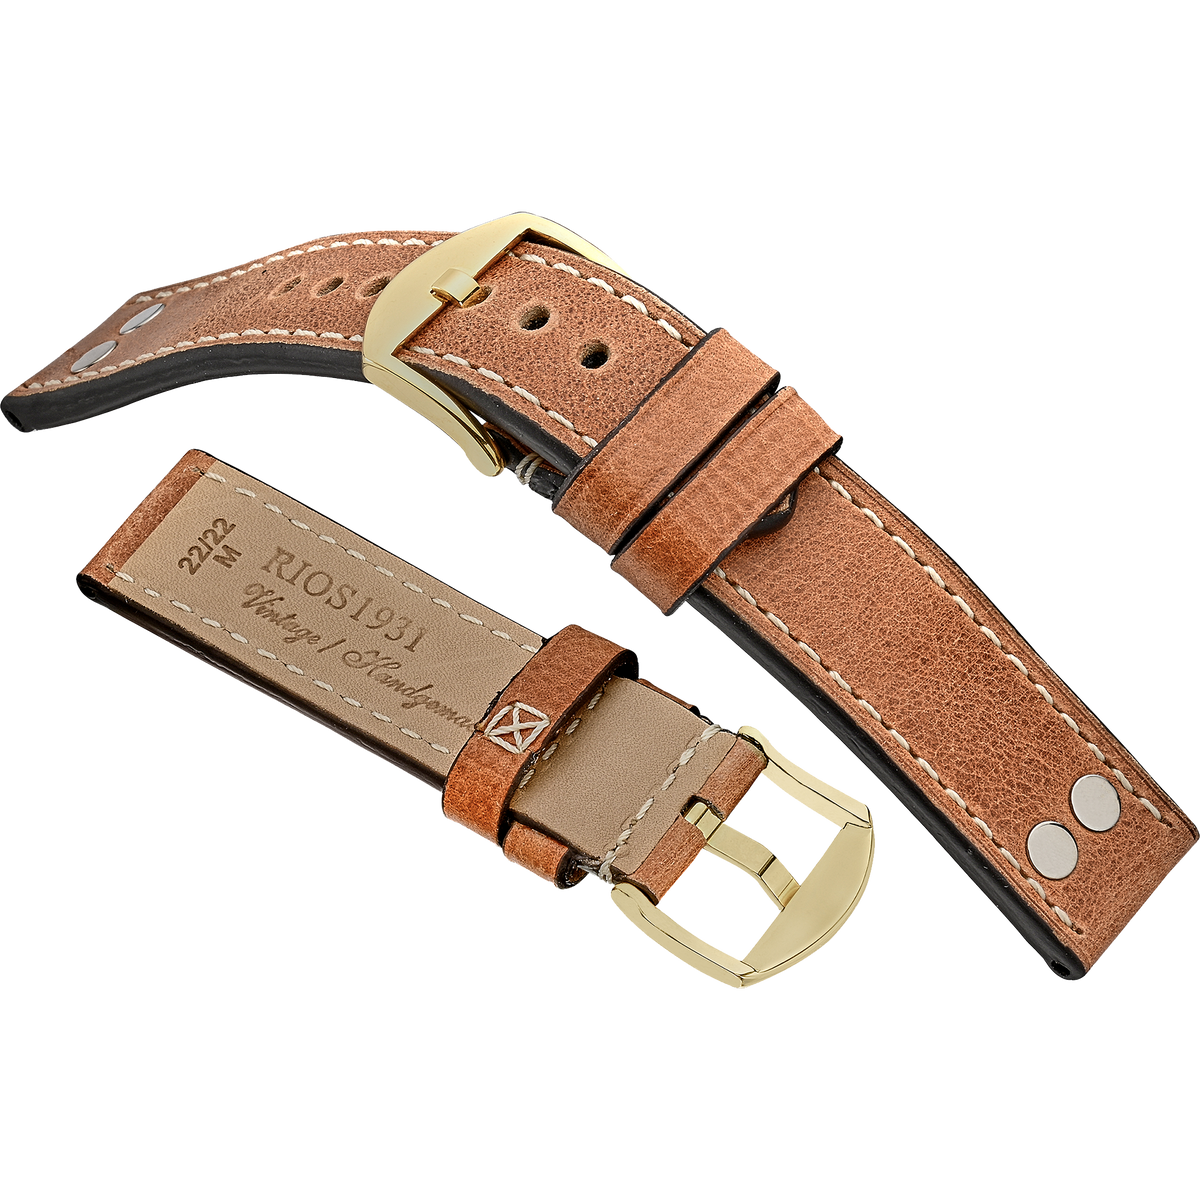 Rios 1931 Watch Bands - Chesterfield - Genuine Vintage Leather